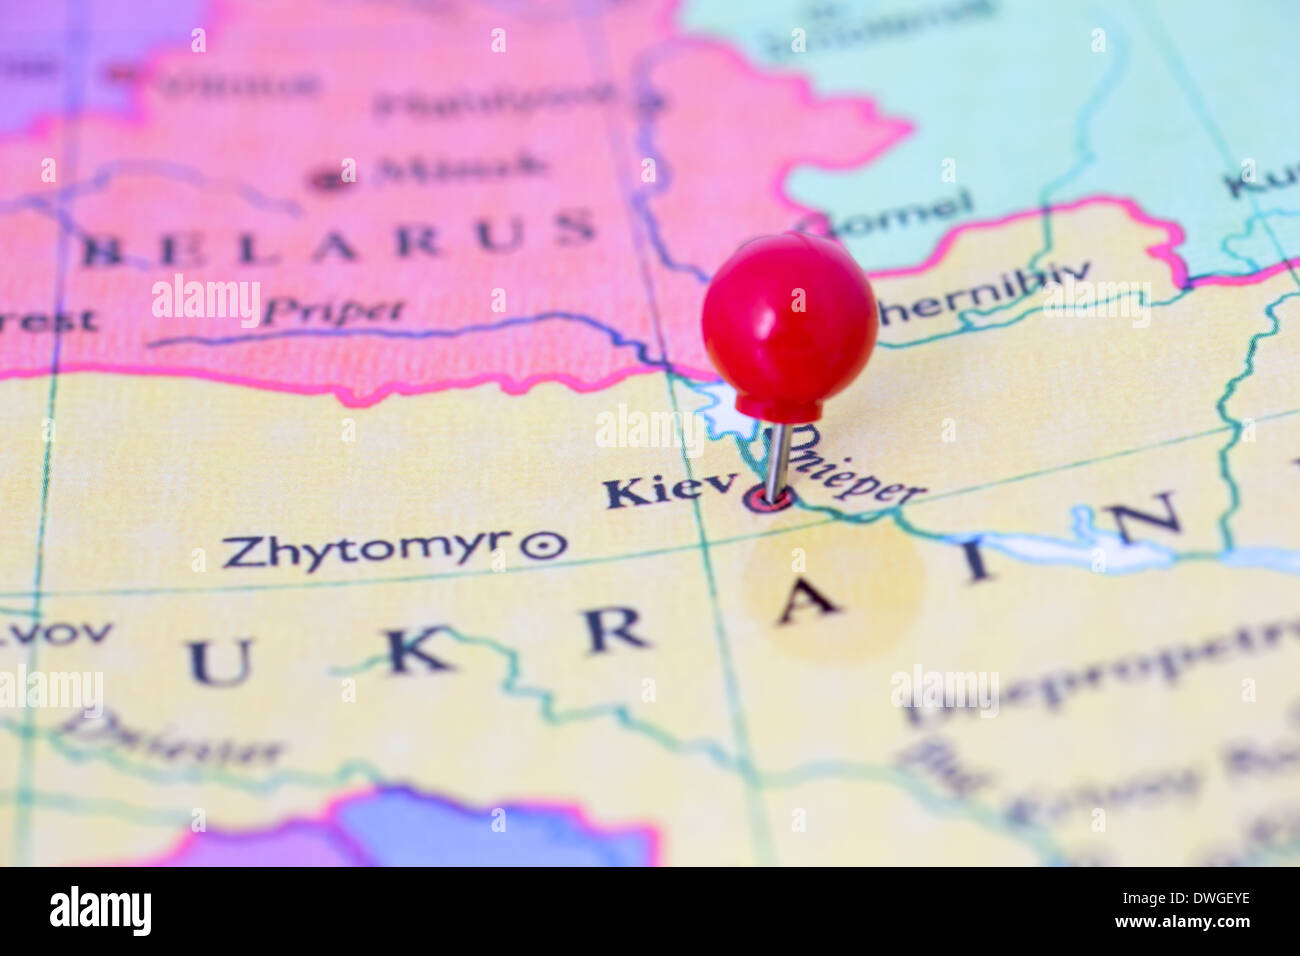 Round red thumb tack pinched through city of Kiev on Ukraine map. Part of collection covering all major capitals of Europe. Stock Photo